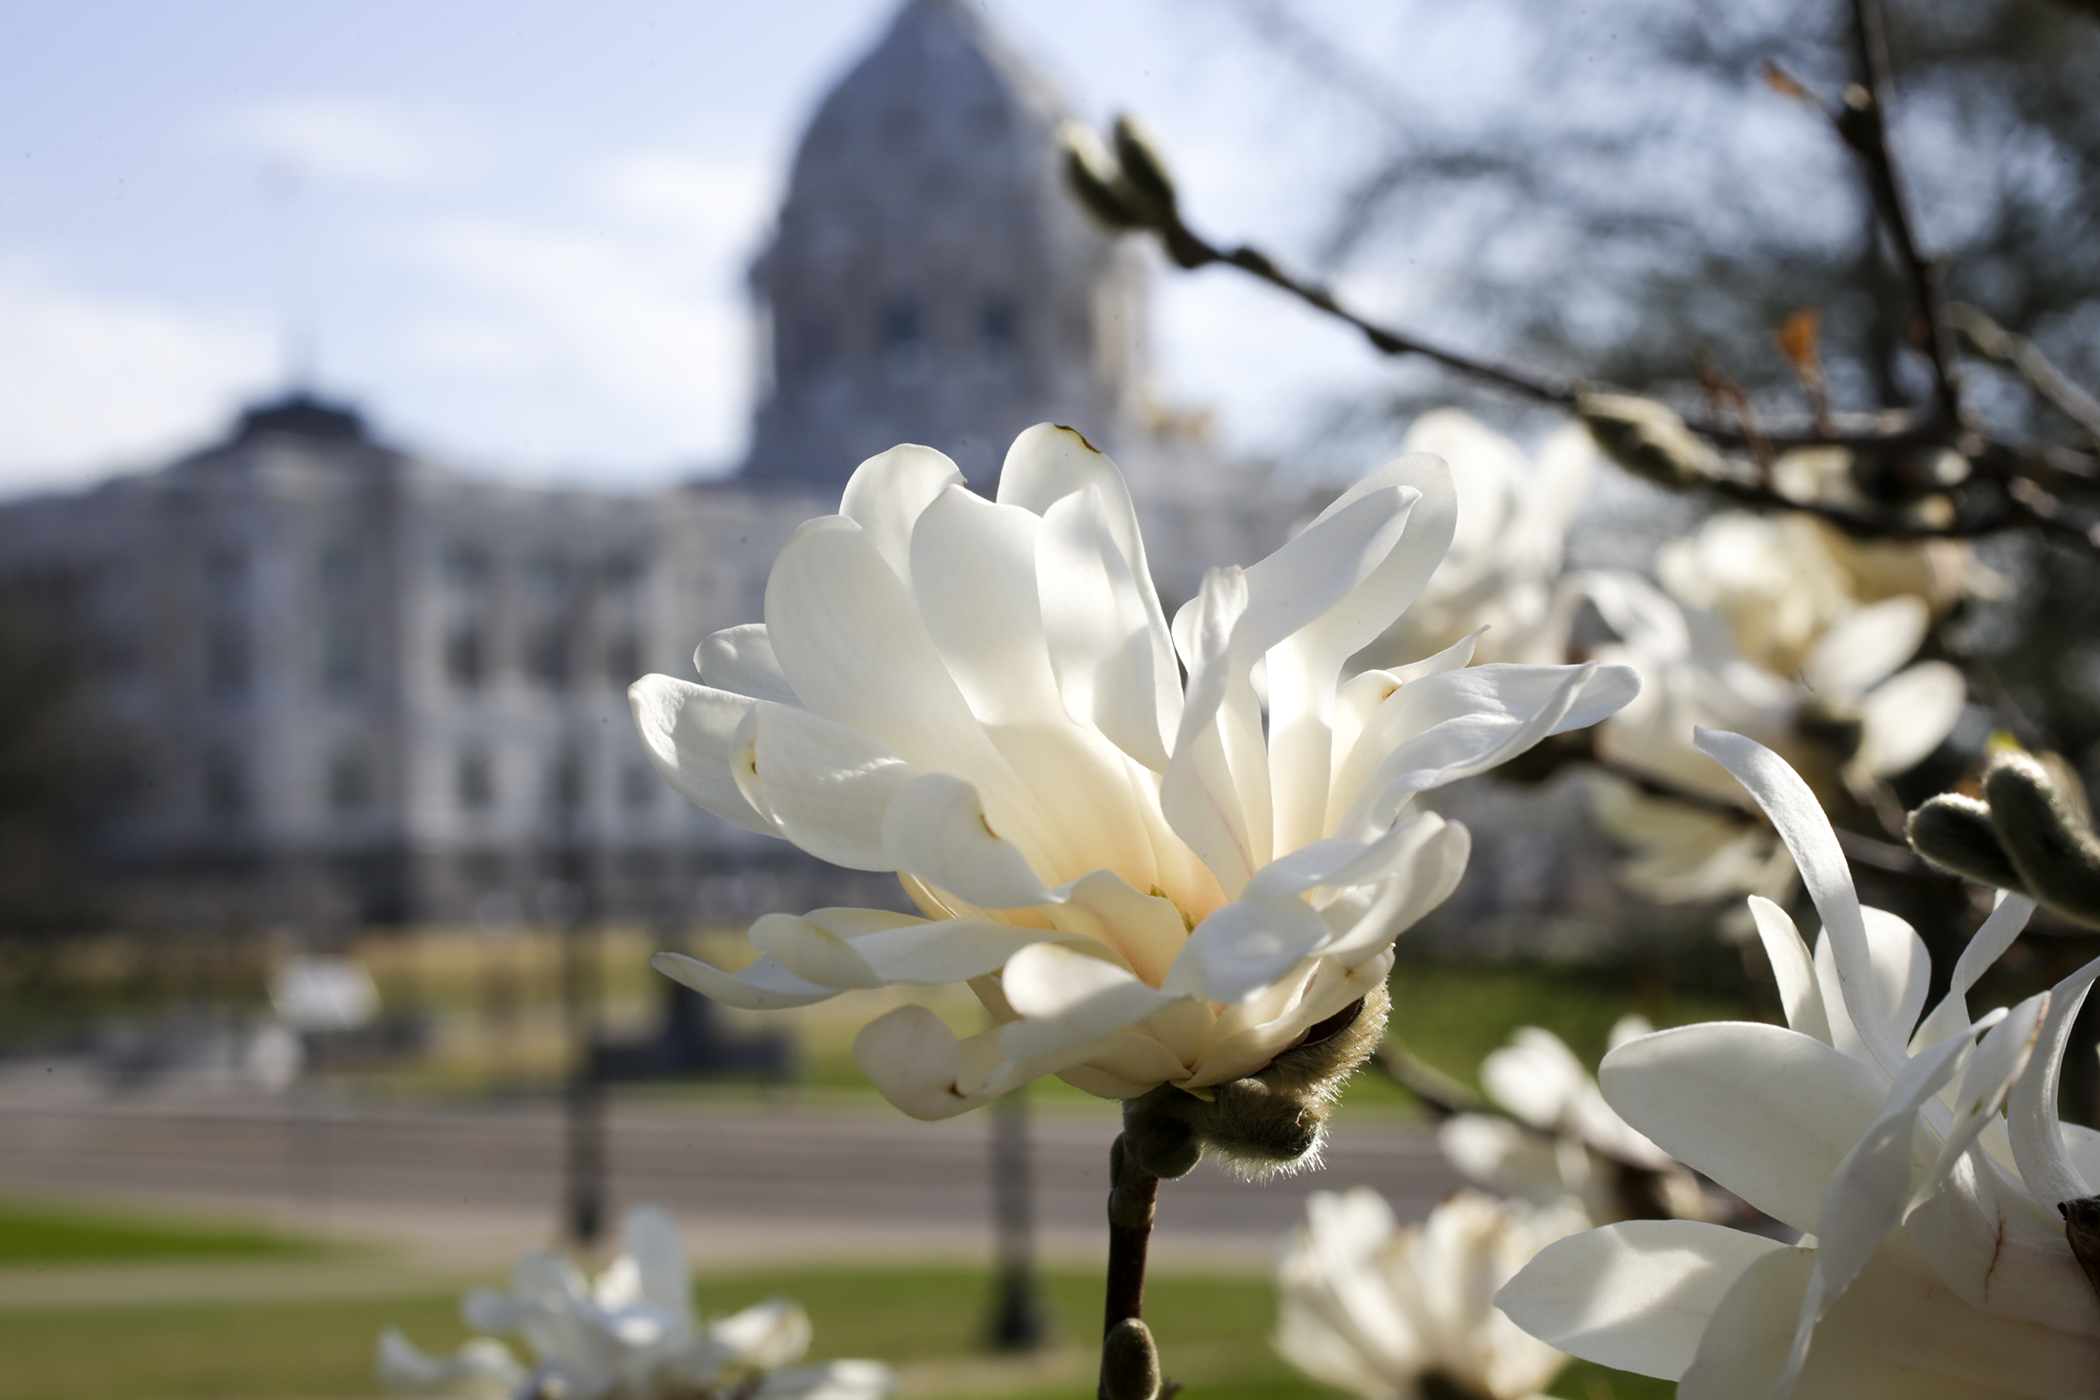 The Capitol is silhouetted behind a magnolia bloom May 3. Photo by Paul Battaglia